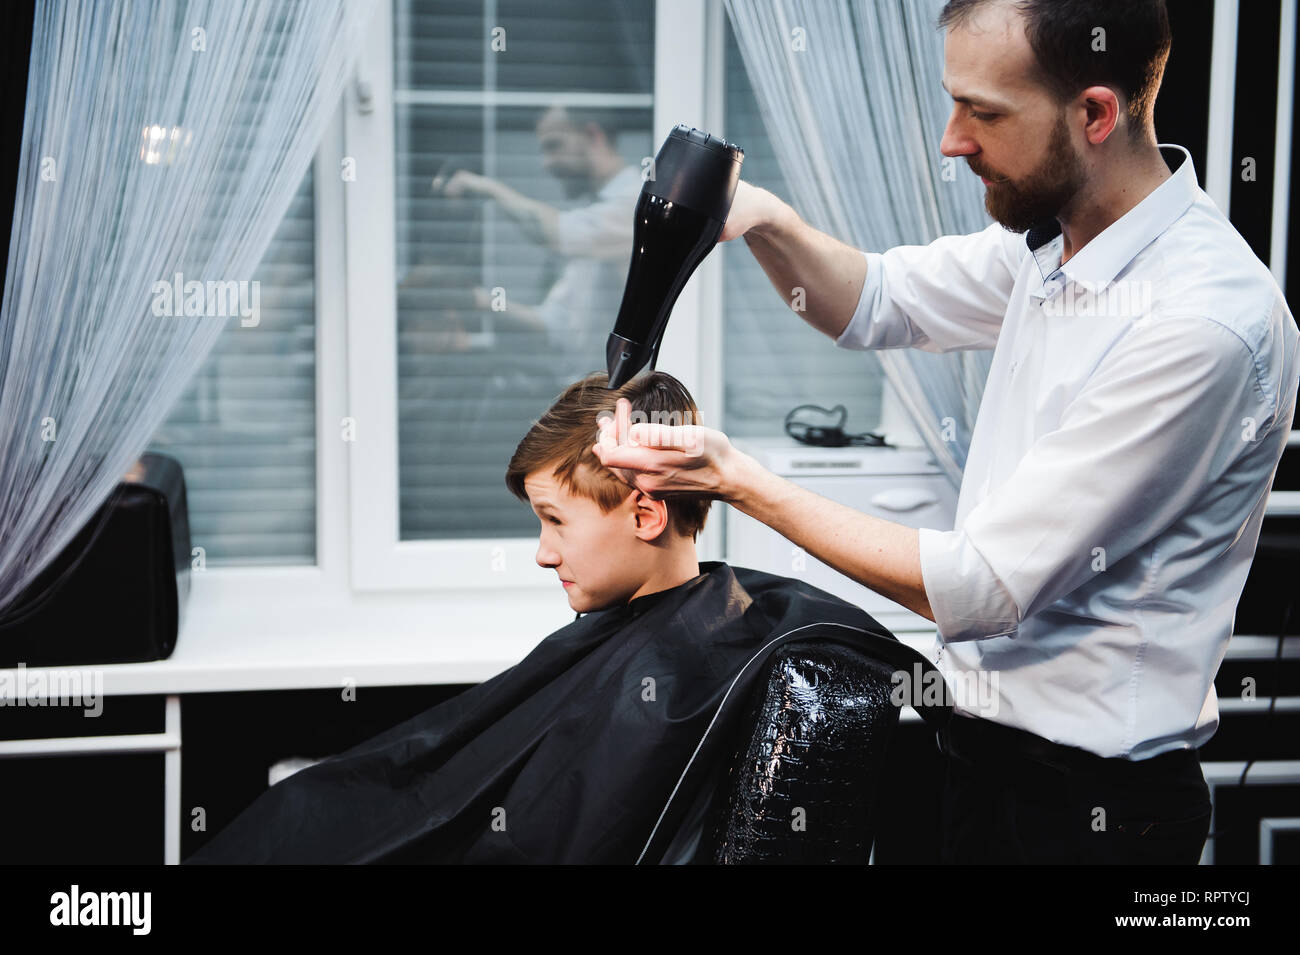 Cute Little Boy Is Getting Haircut By Hairdresser At The